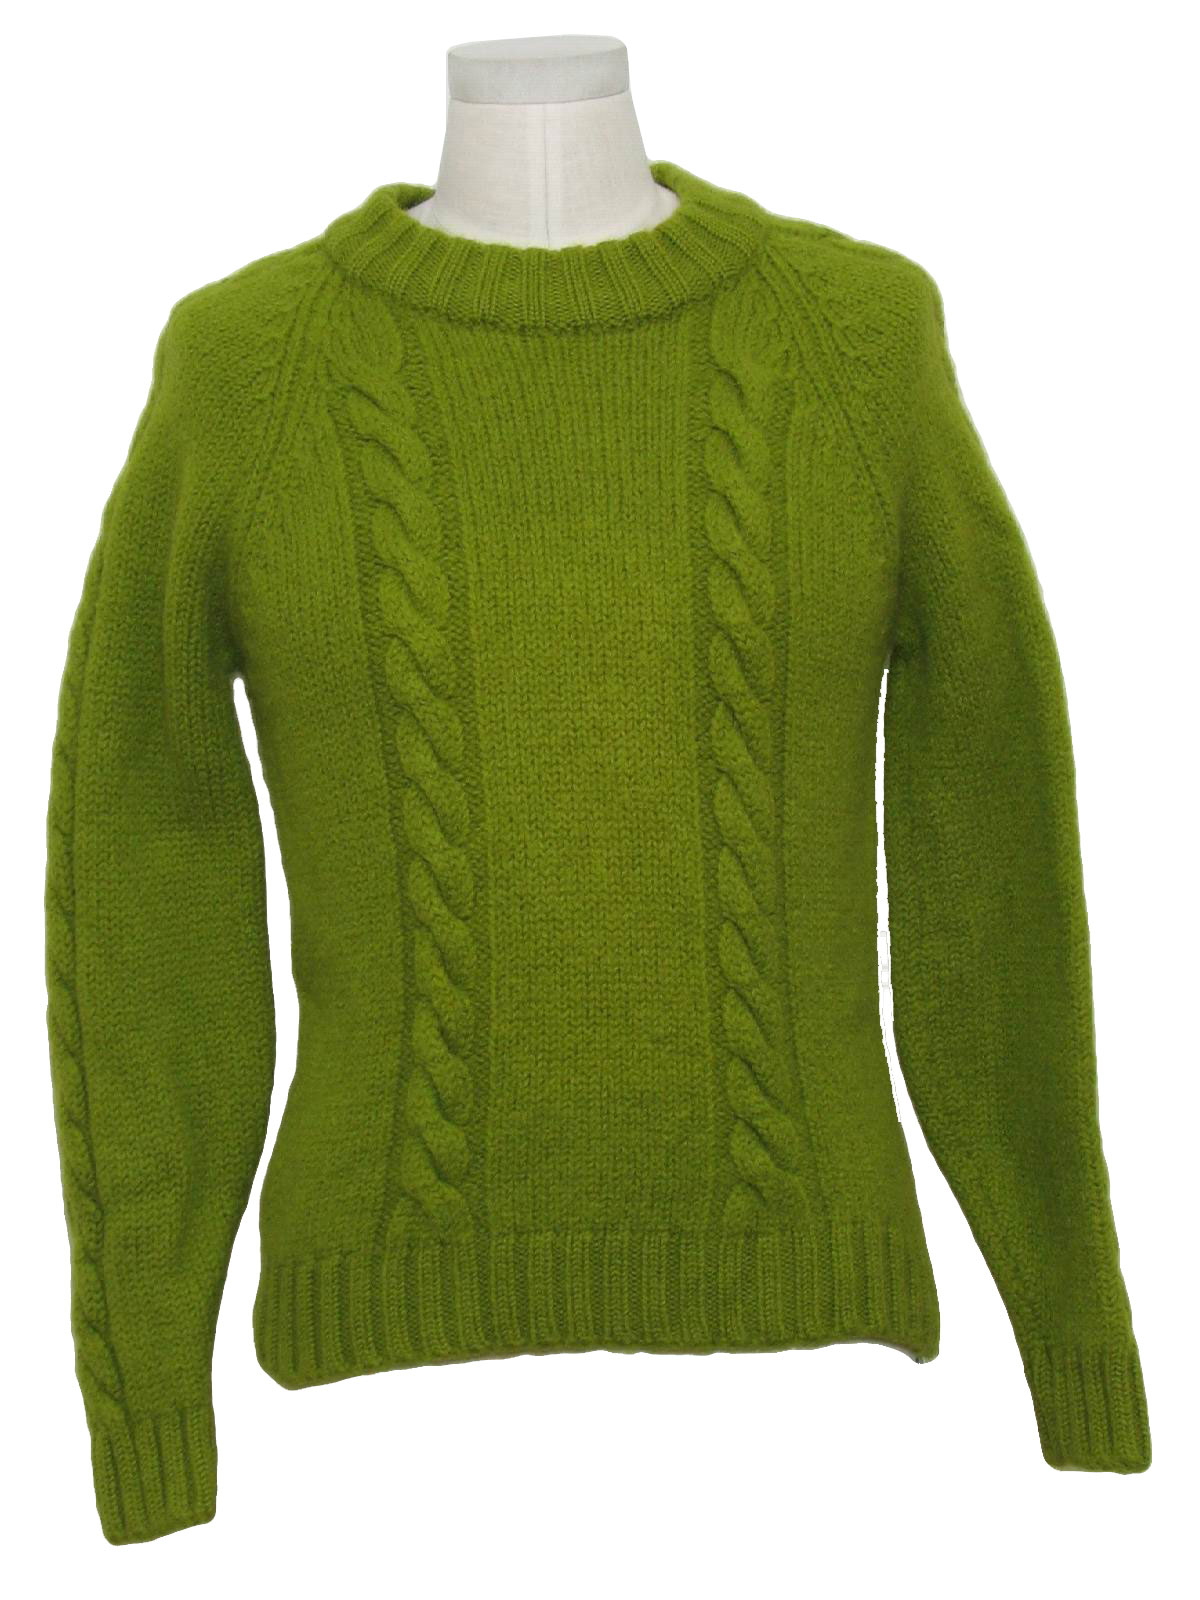 Retro 1960s Sweater: 60s -Campus- Mens bright olive green wool cable ...